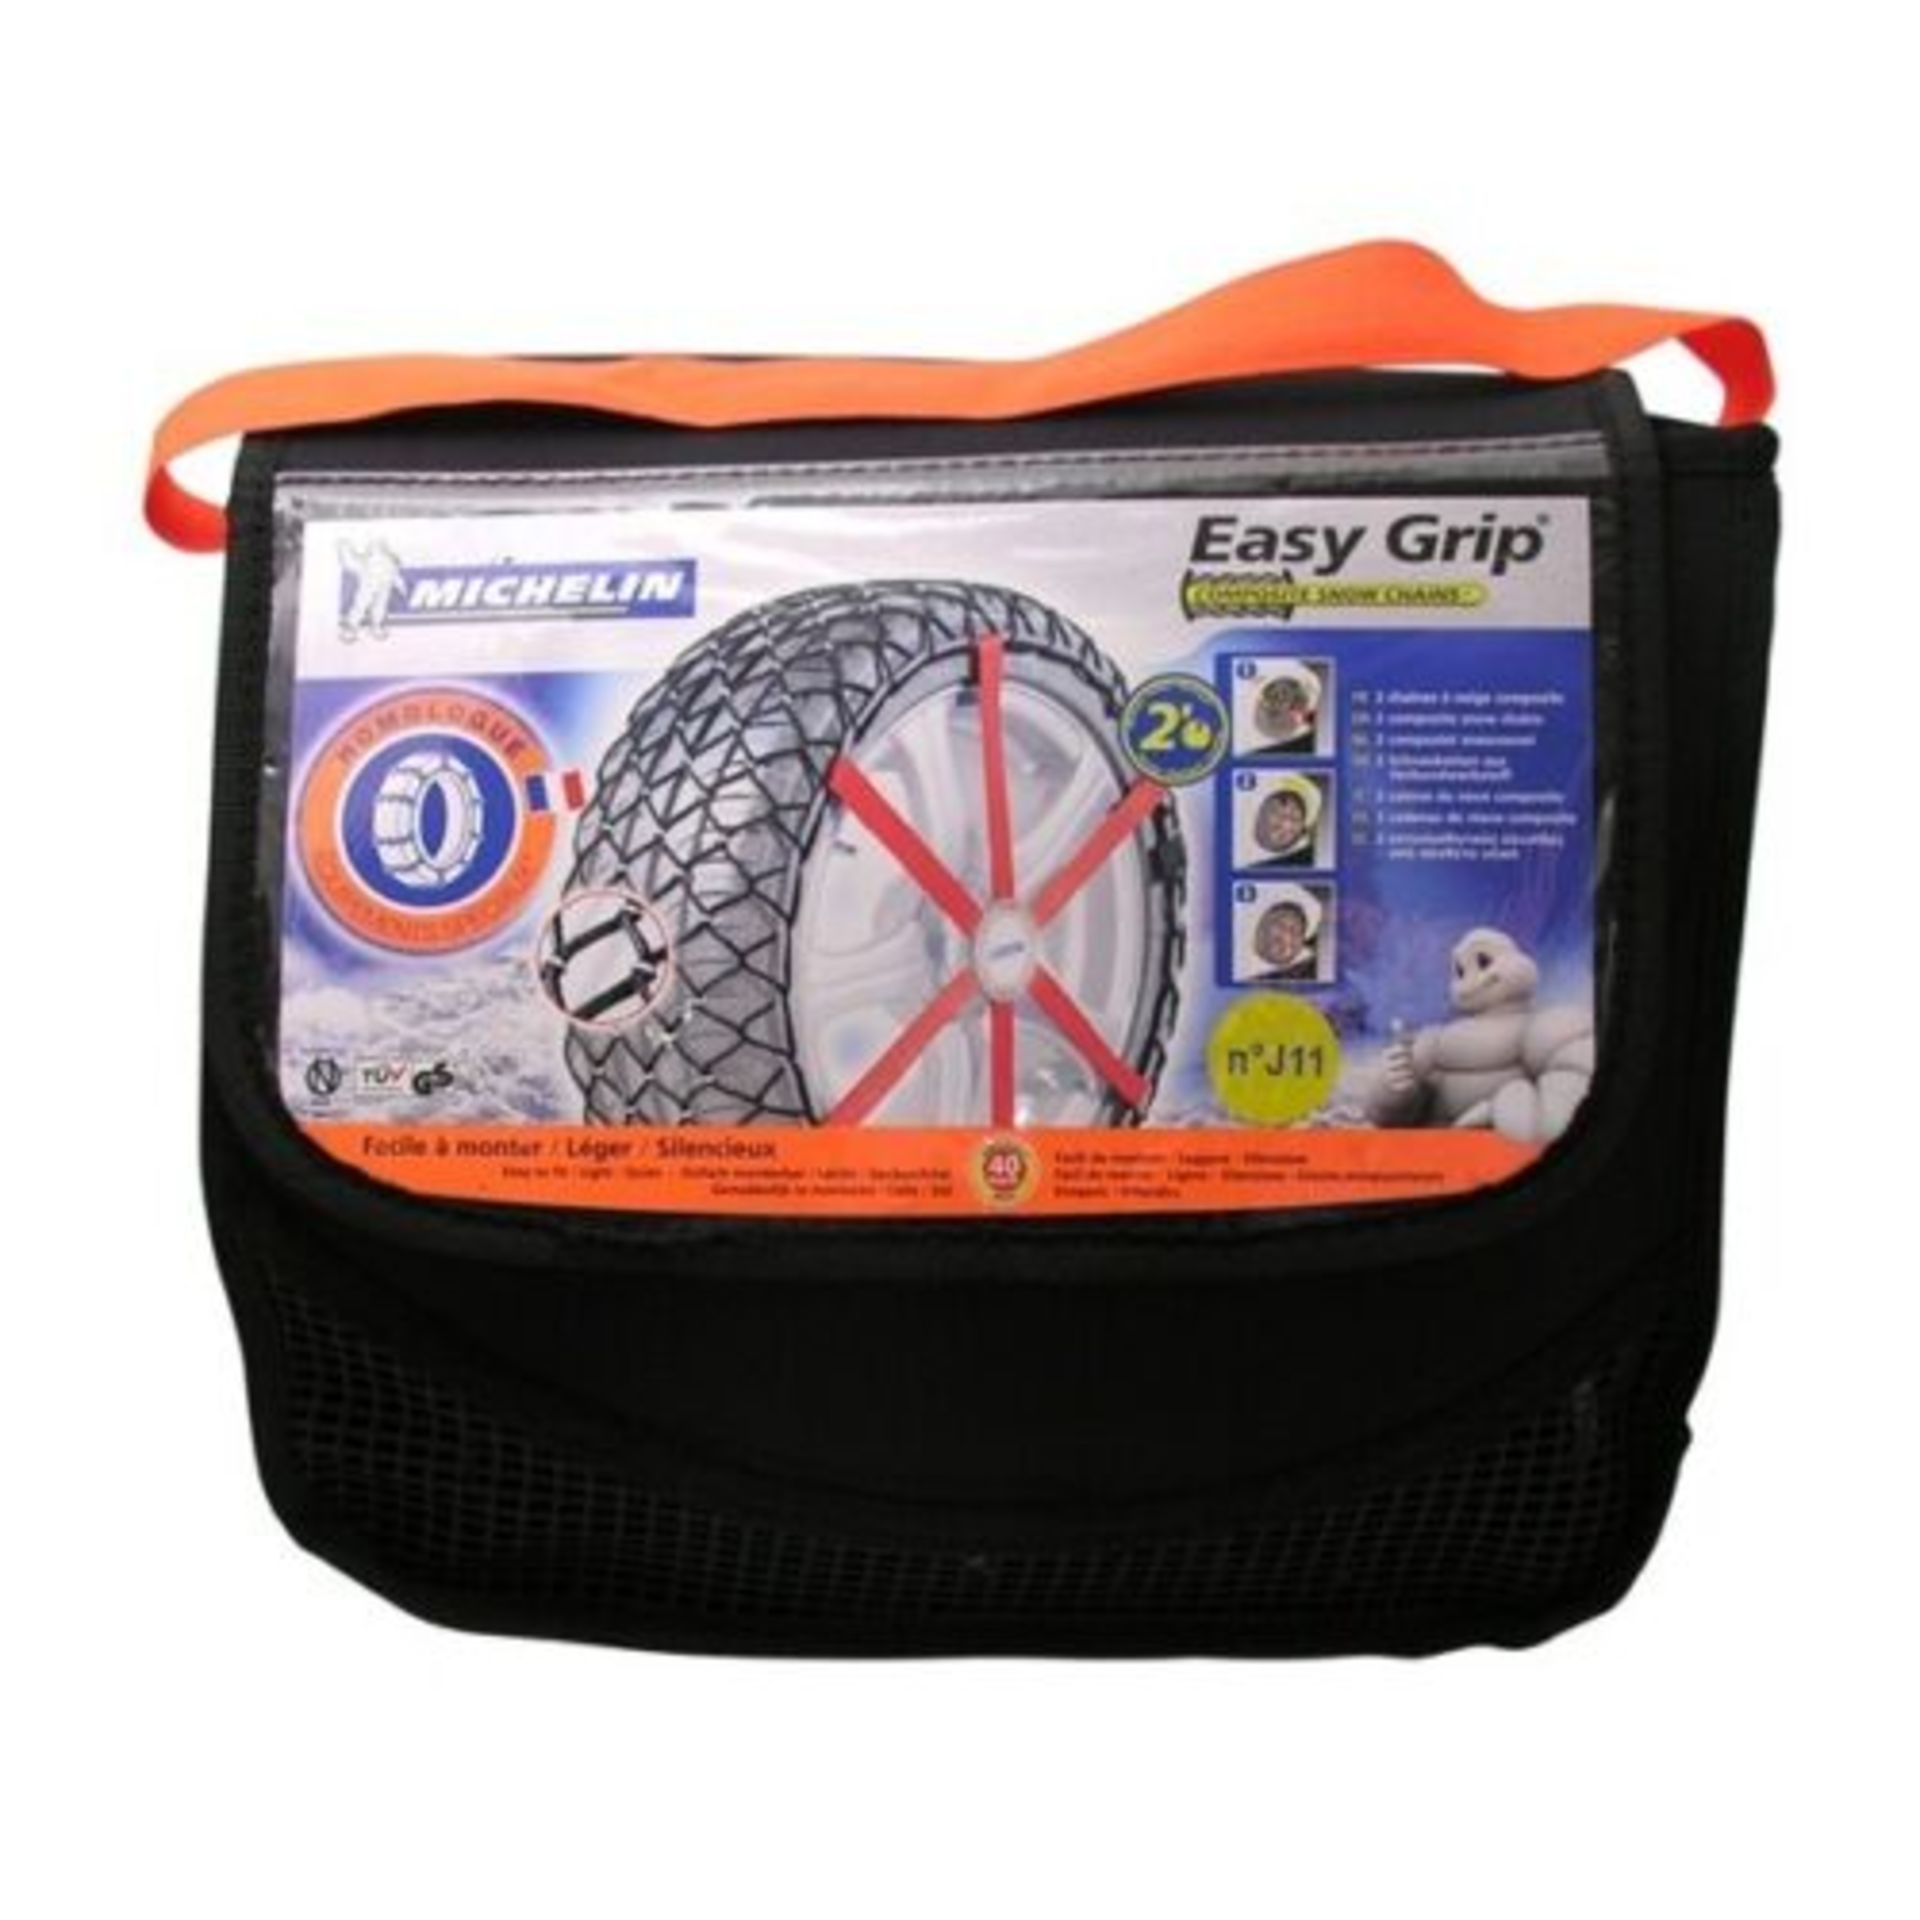 NEW PACKAGED SET OF Michelin Snow Sock Easy Grip 4X4 X13. RRP £92.95. The Michelin Easy Grip 4X4